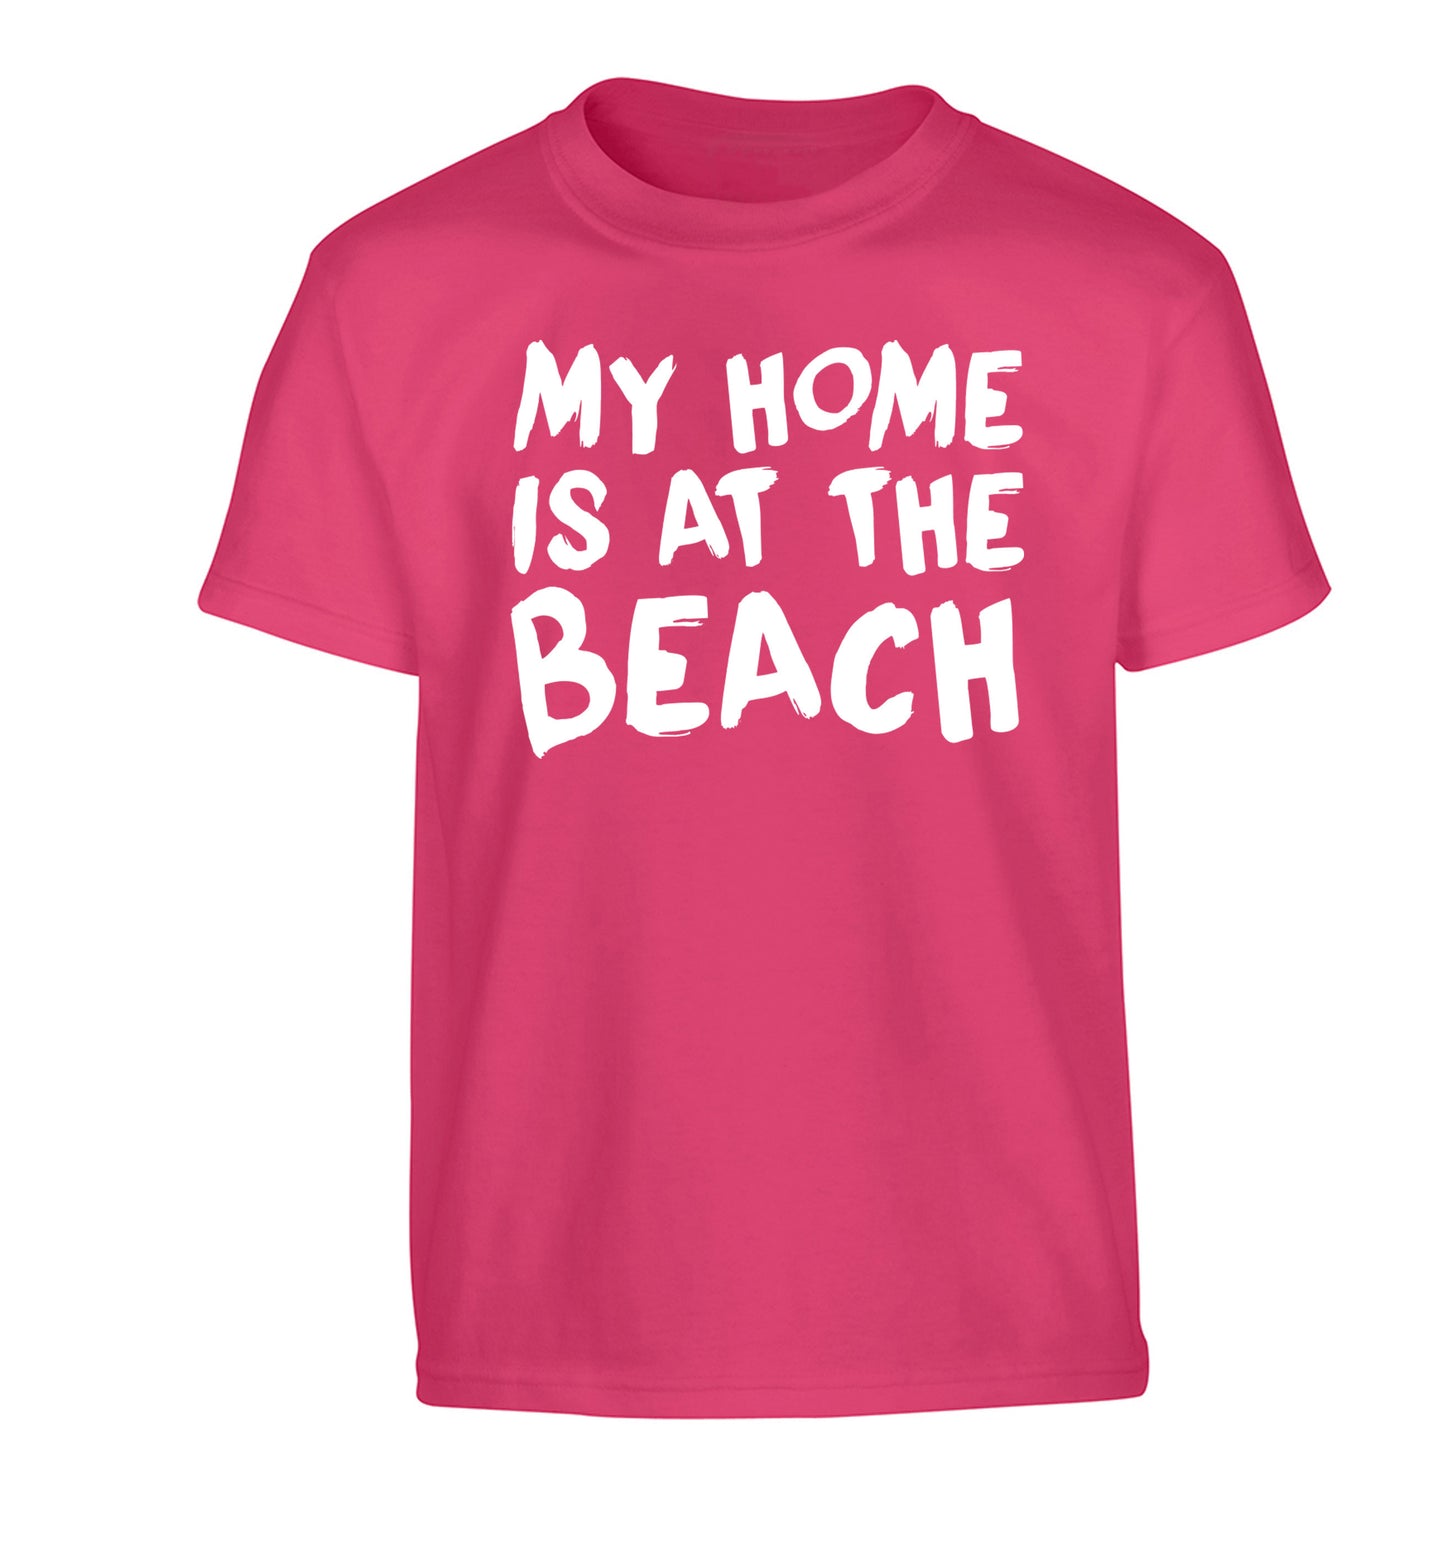 My home is at the beach Children's pink Tshirt 12-14 Years